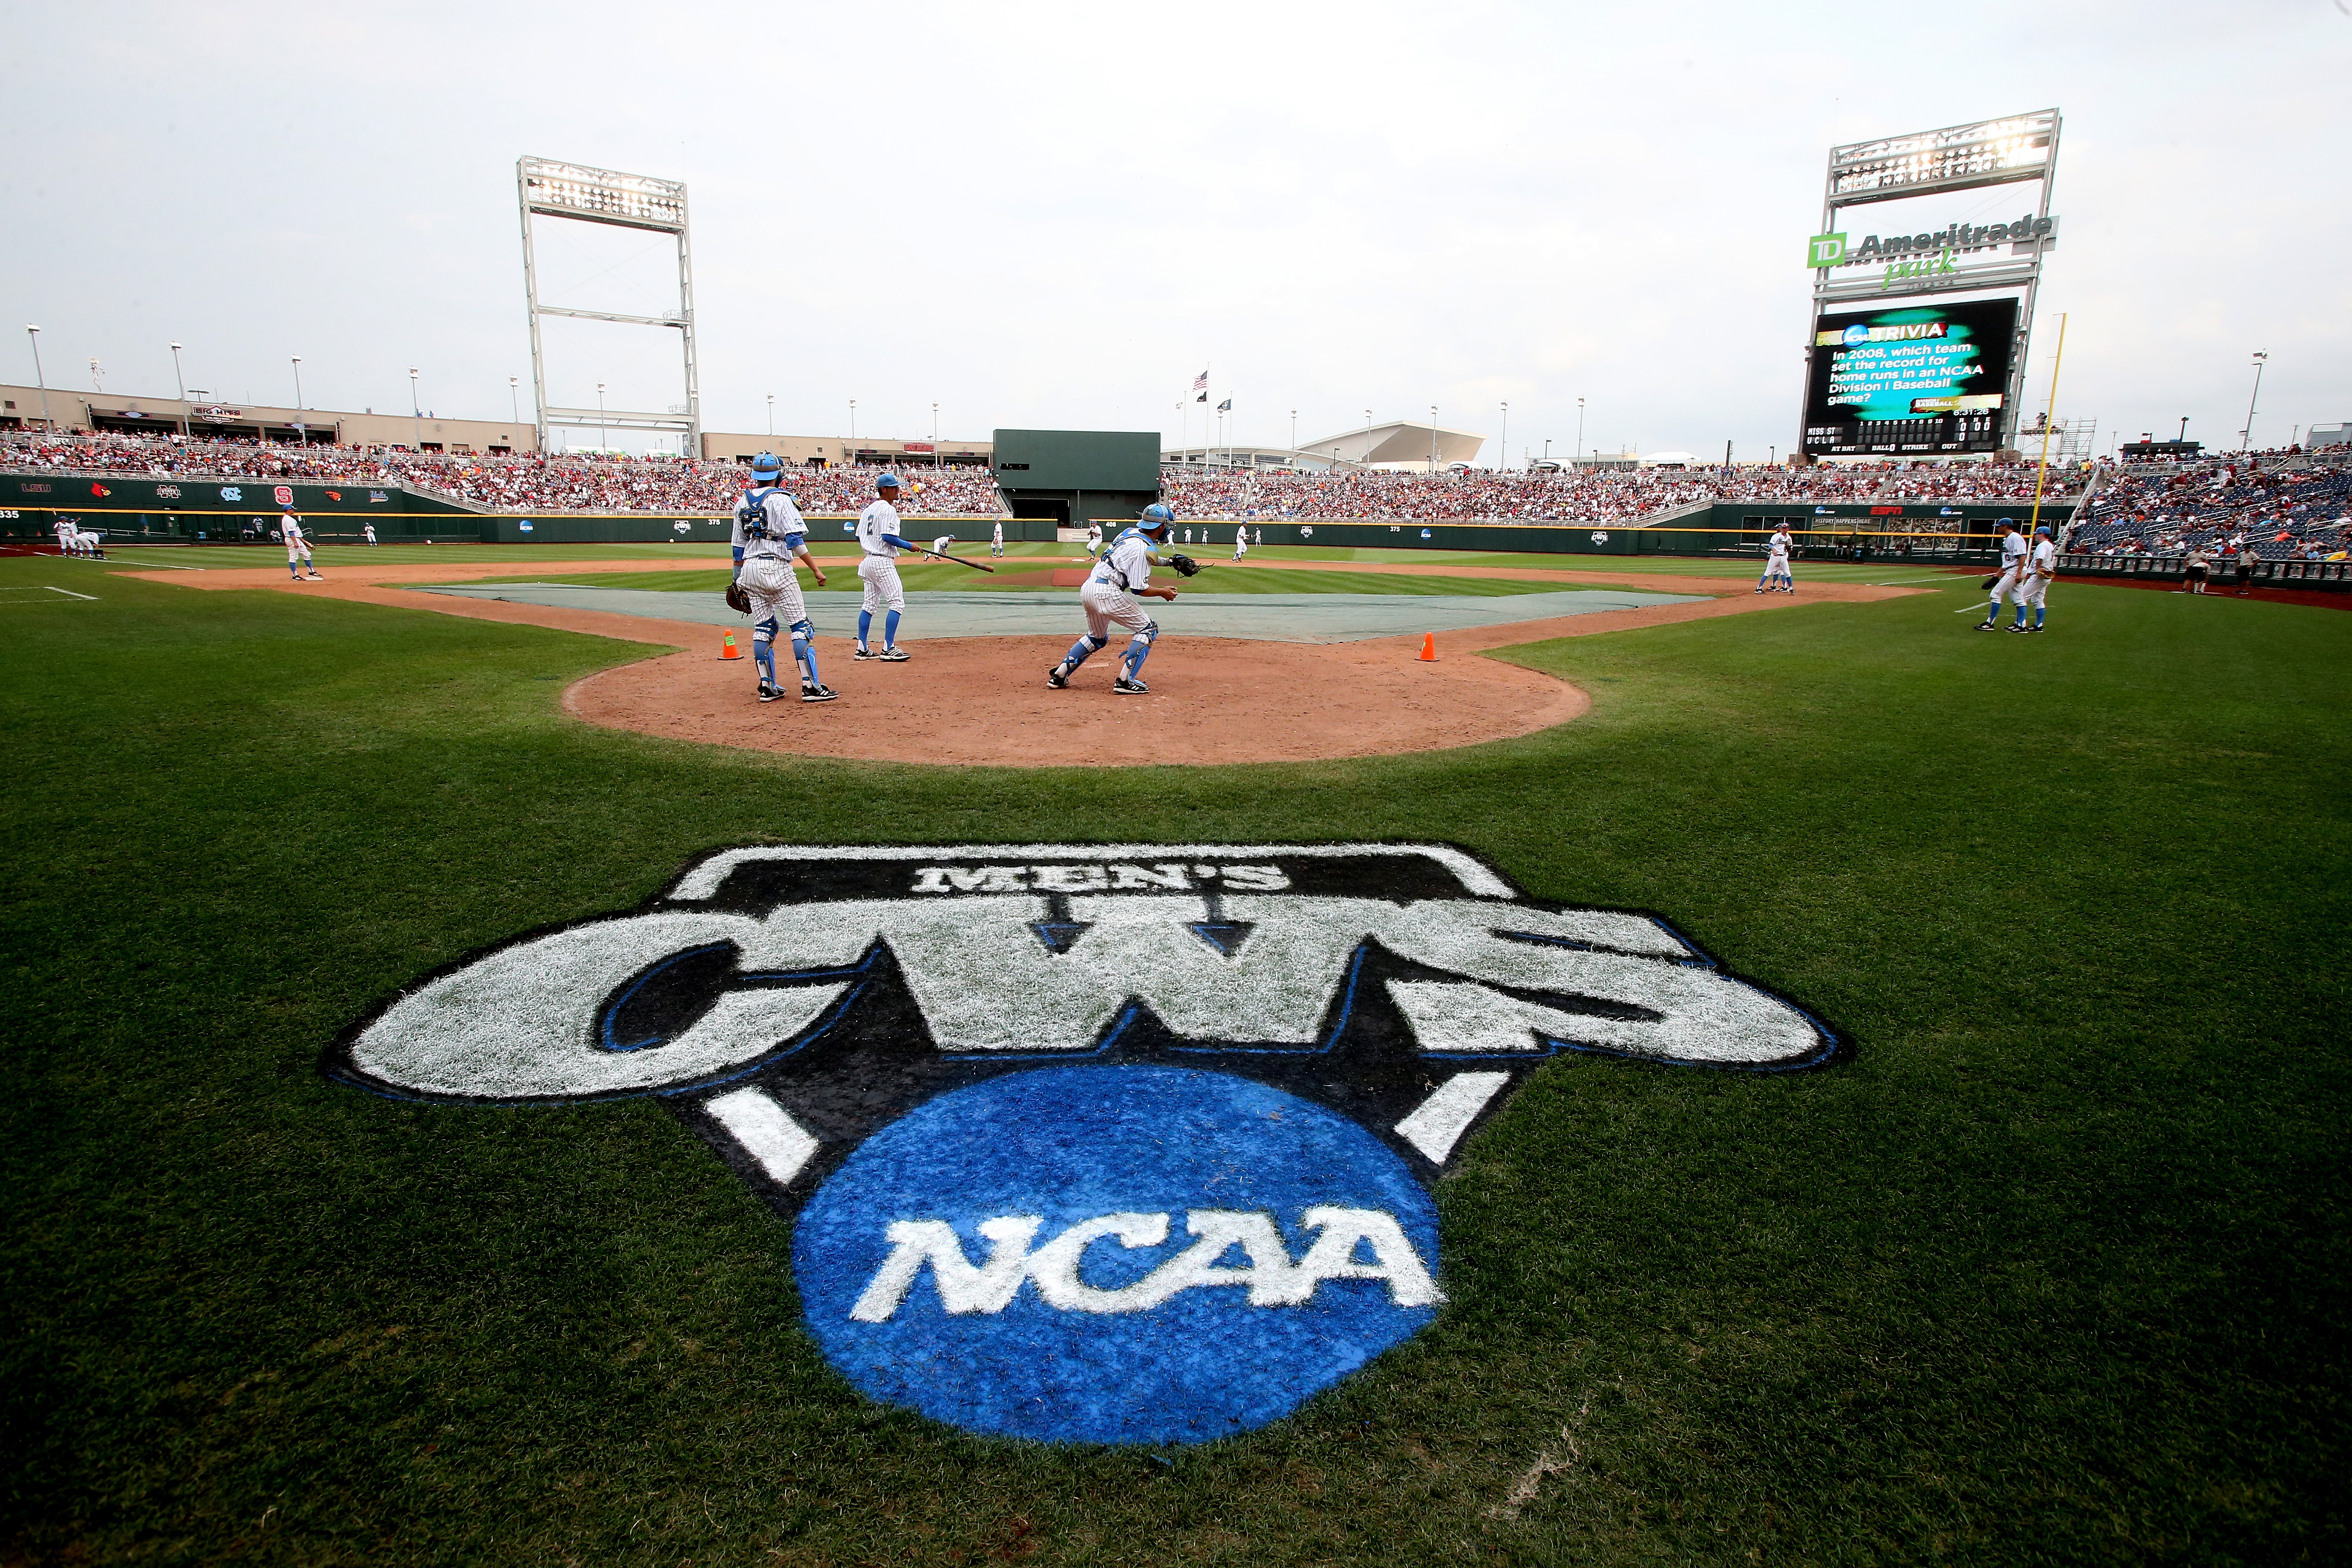 The Road to Omaha begins...